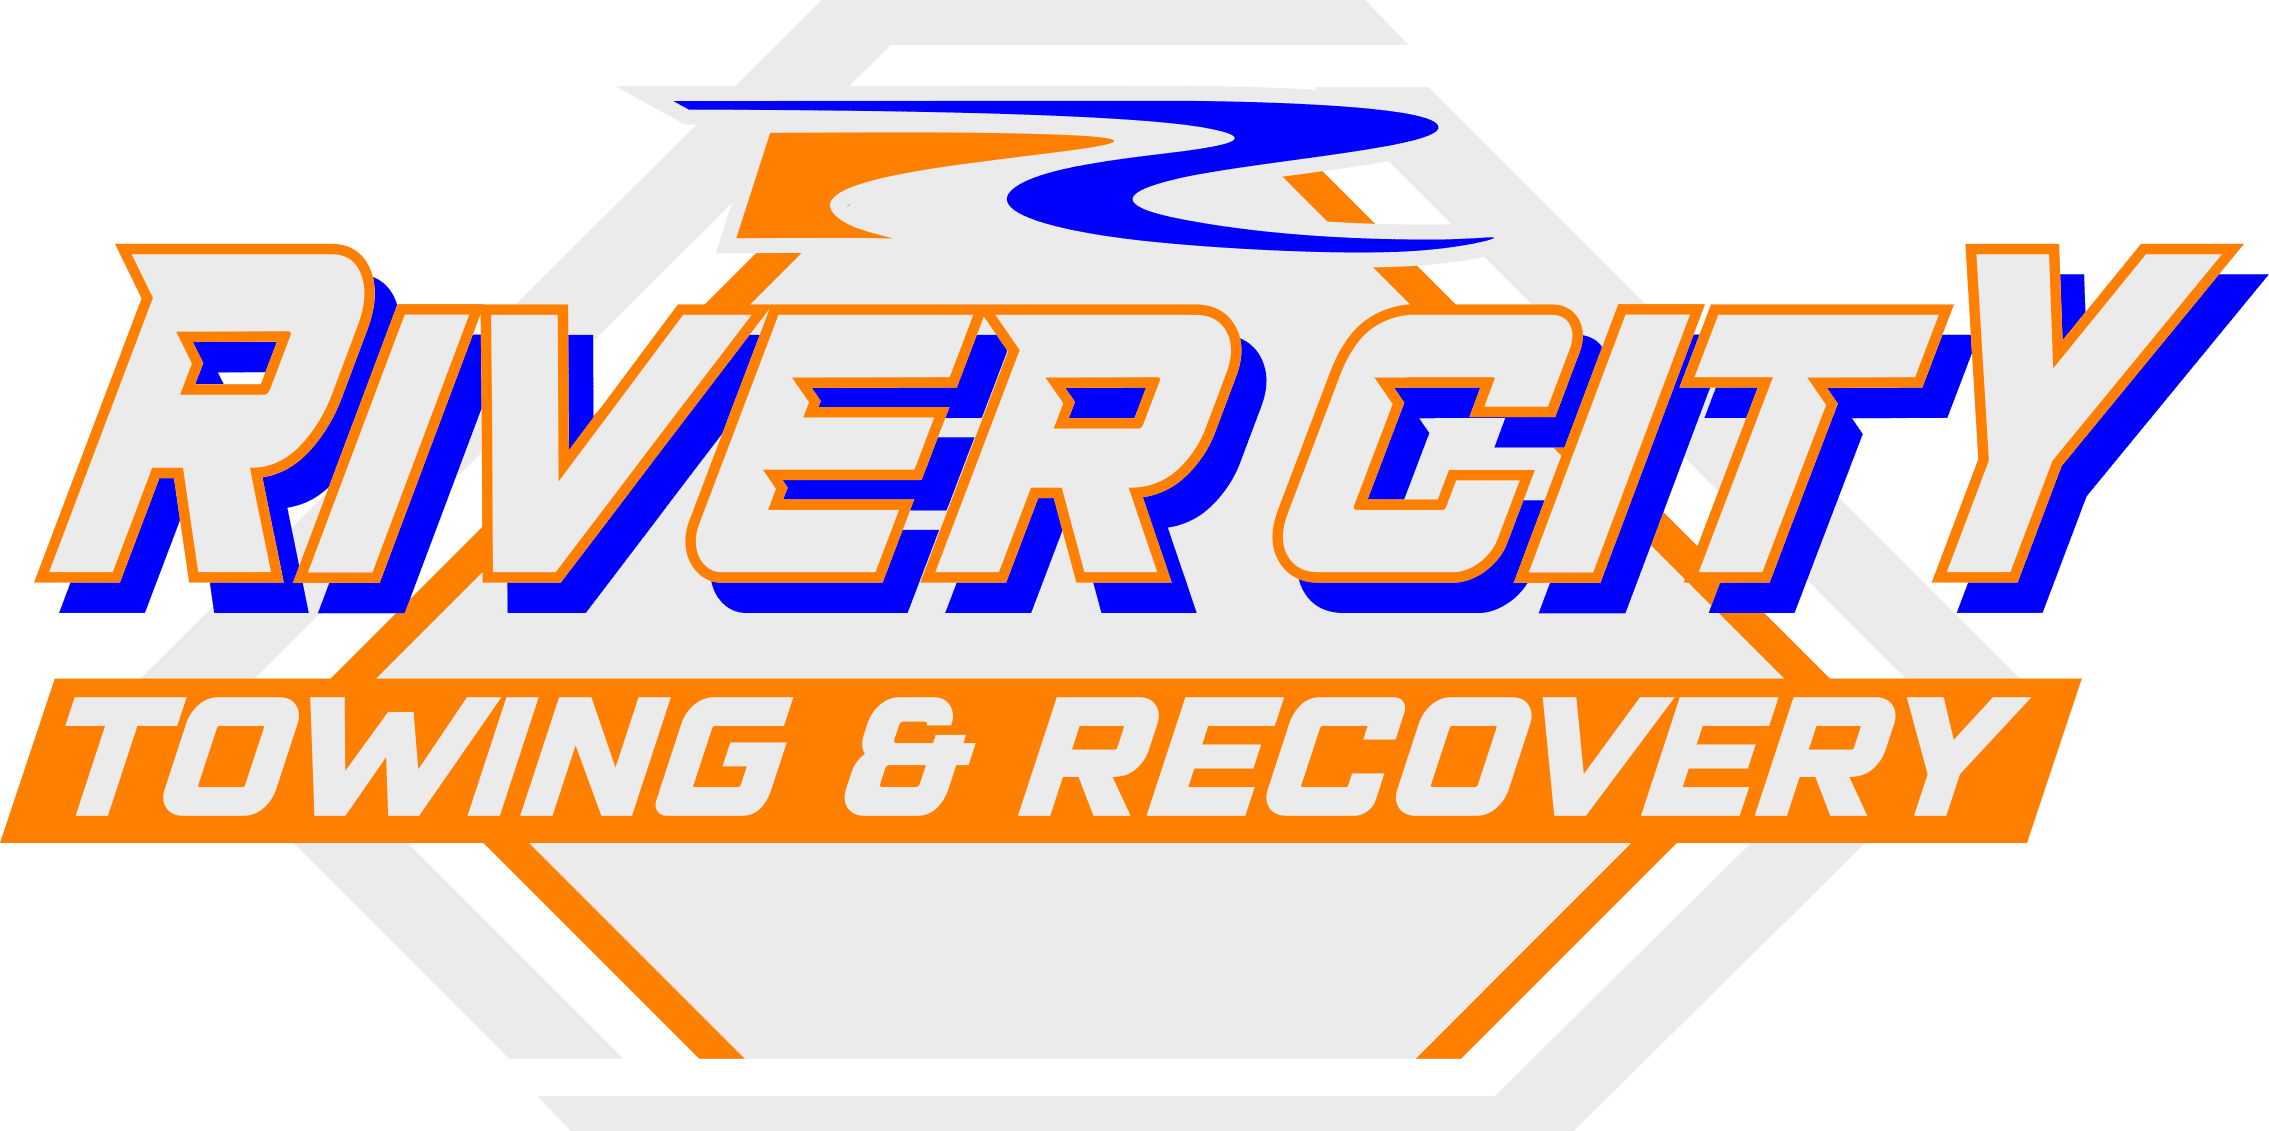 River City Towing & Recovery